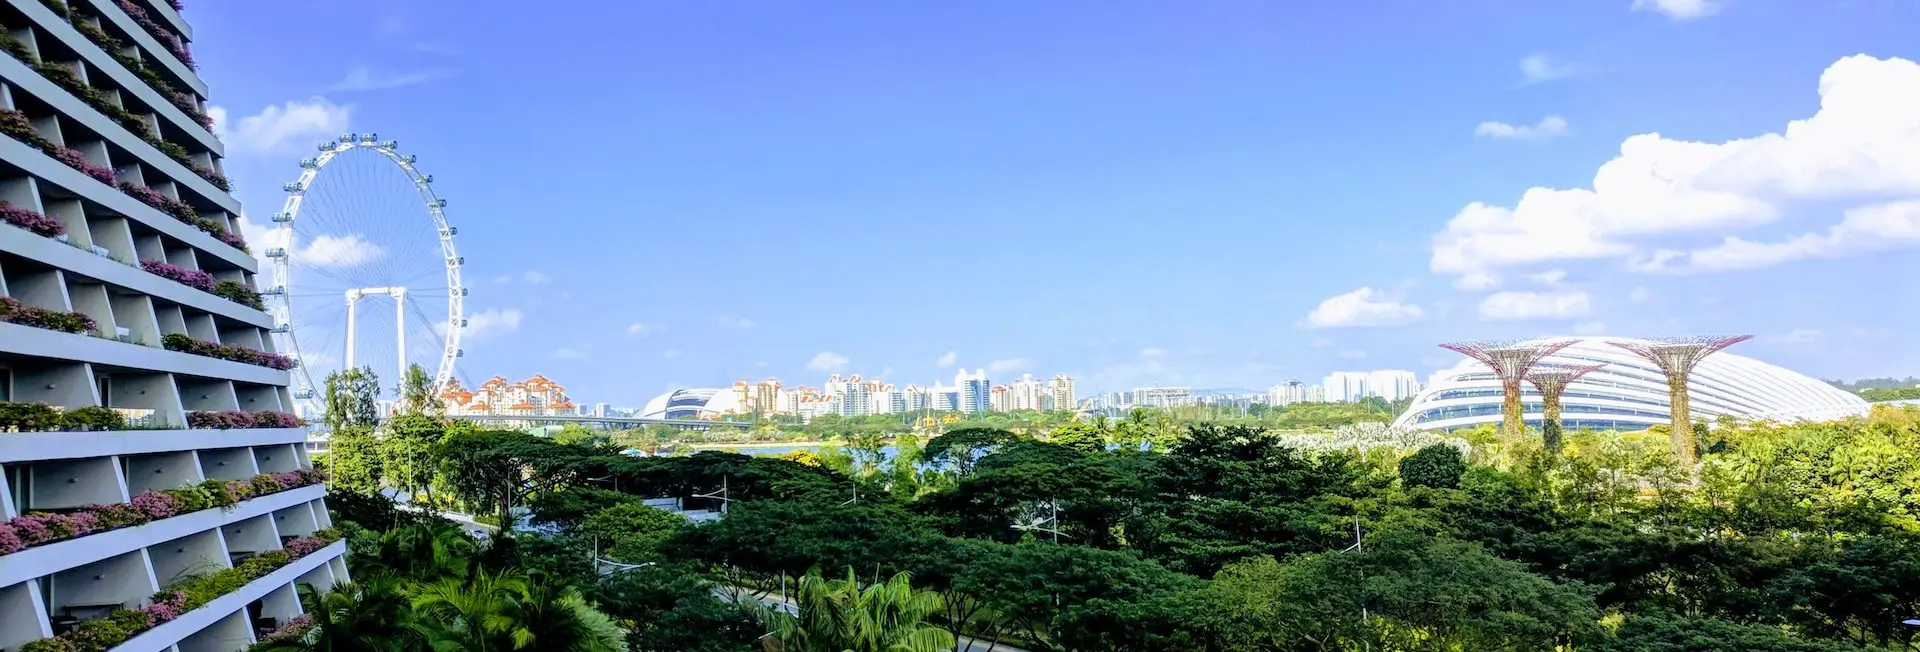 Singapore is a green and sustainable city